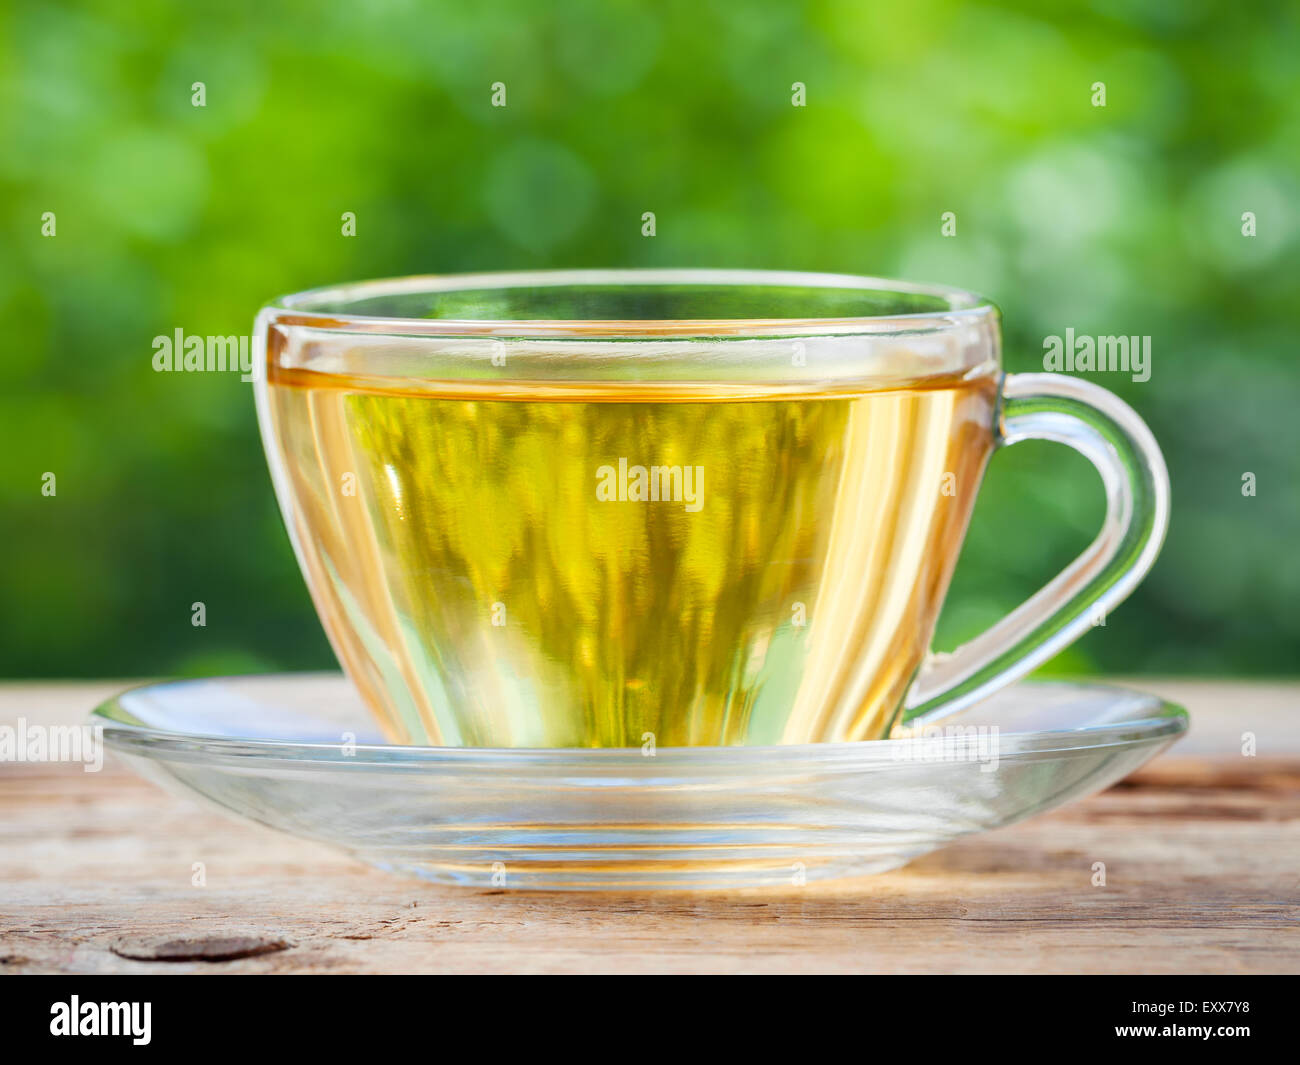 https://c8.alamy.com/comp/EXX7Y8/tea-cup-on-wooden-table-green-background-EXX7Y8.jpg